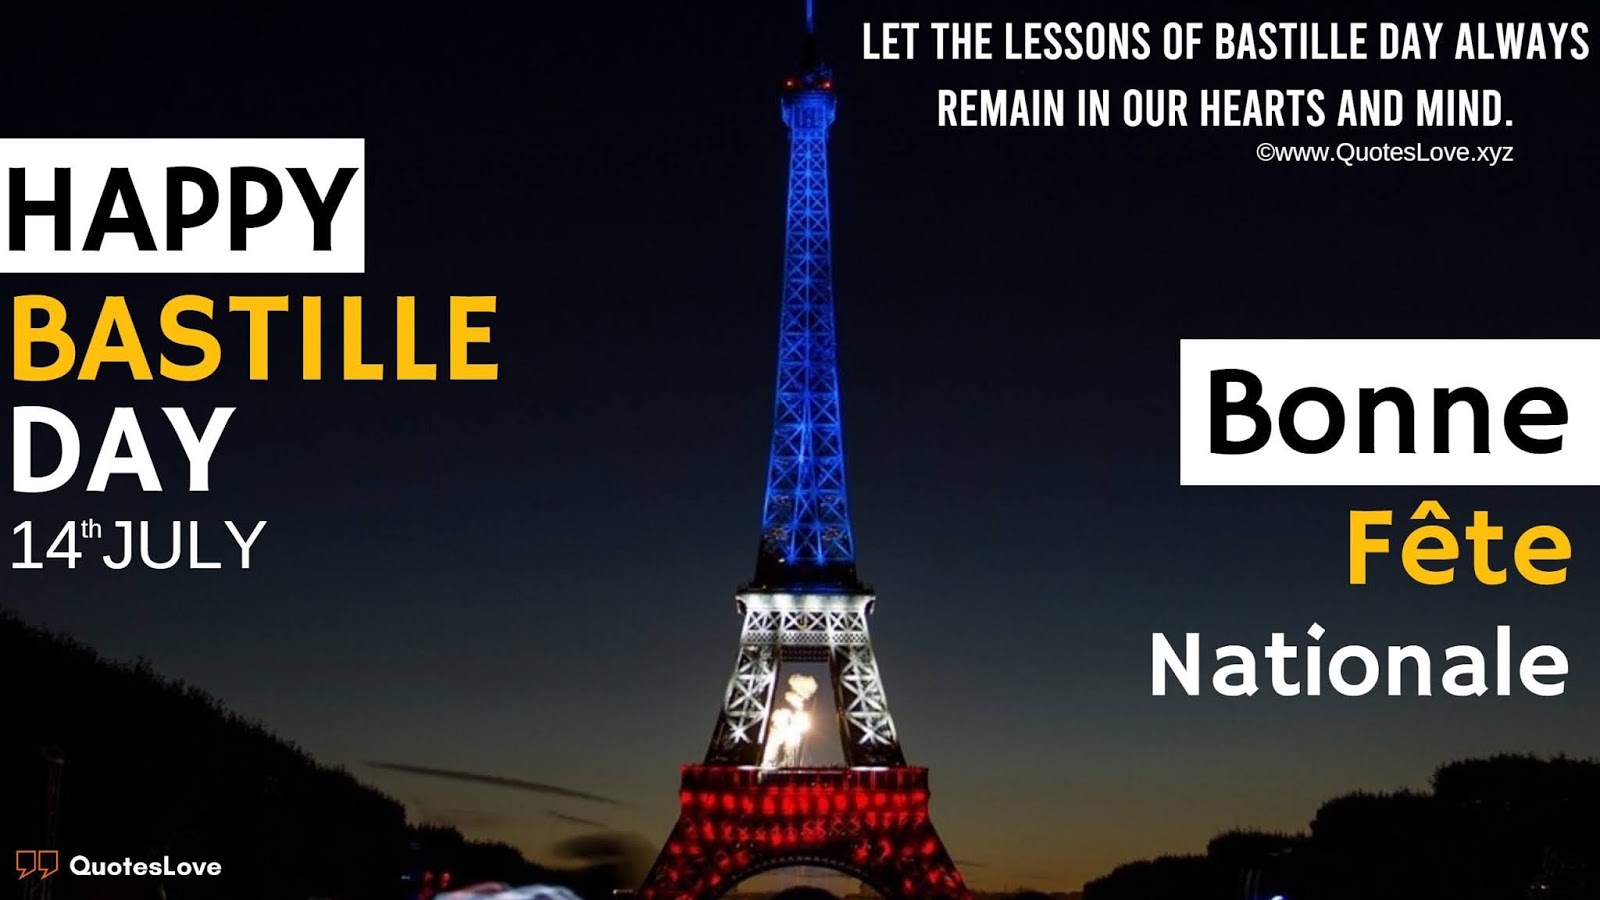 Bastille Day Quotes, Sayings, Wishes, Messages, Greetings, Images, Pictures, Poster, Wallpaper